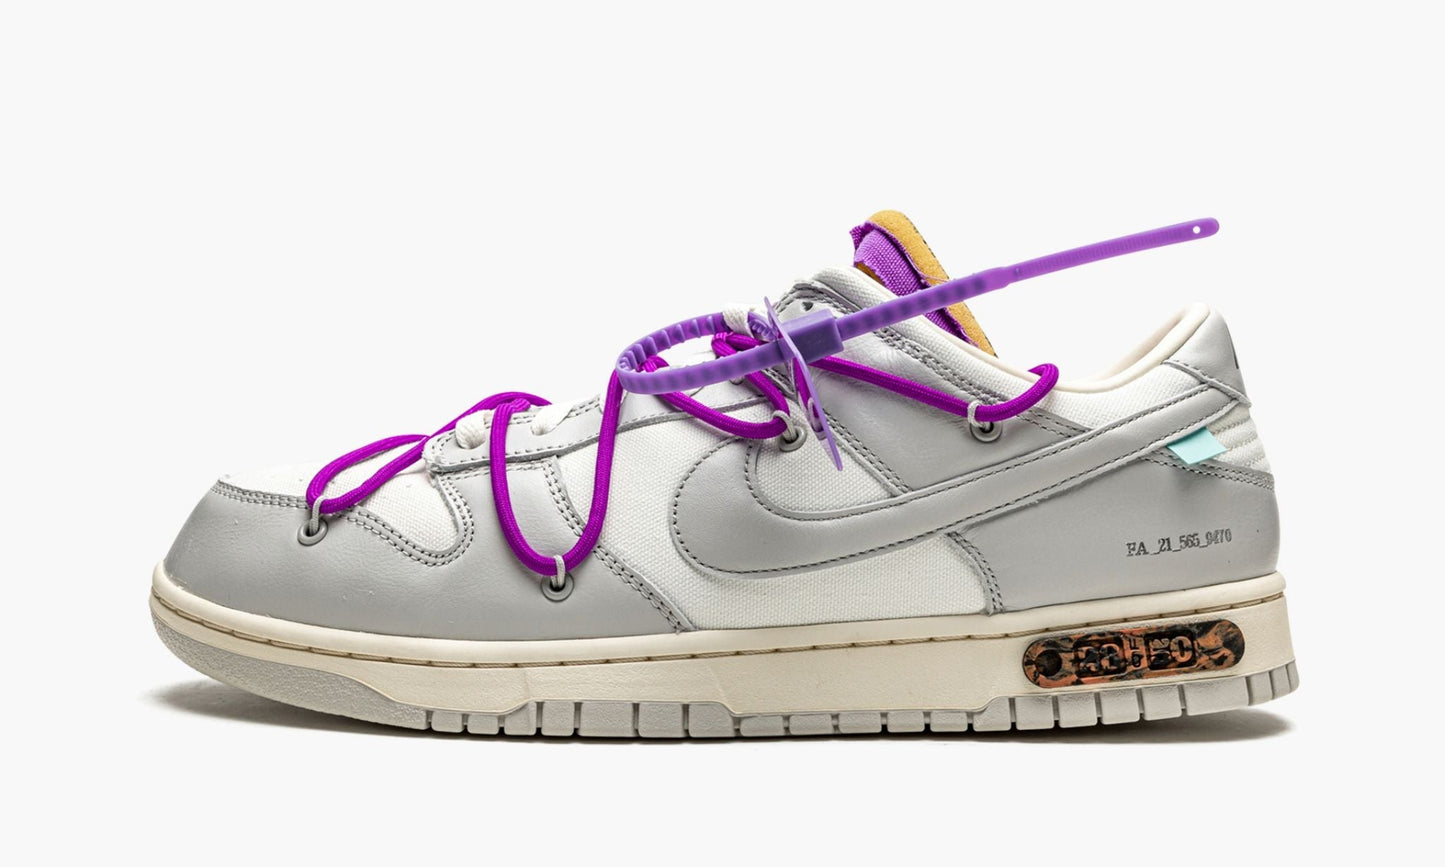 Dunk Low "Off-White - Lot 28"